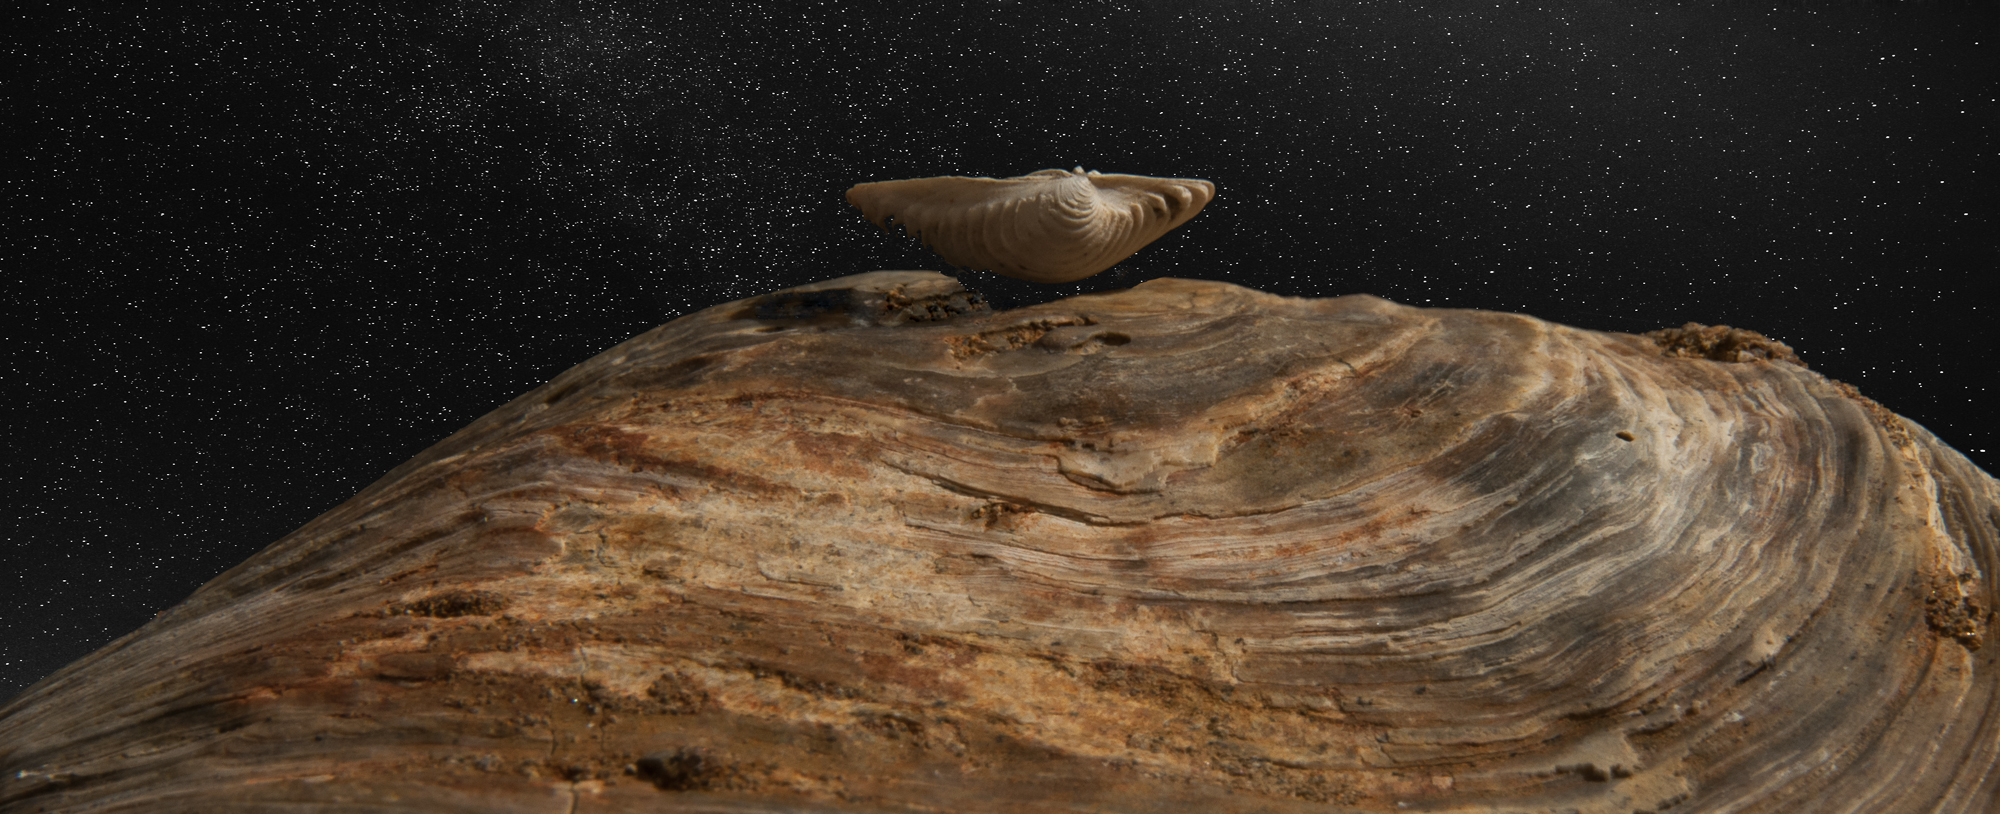 lander "mussel"  meets asteroid "oyster"